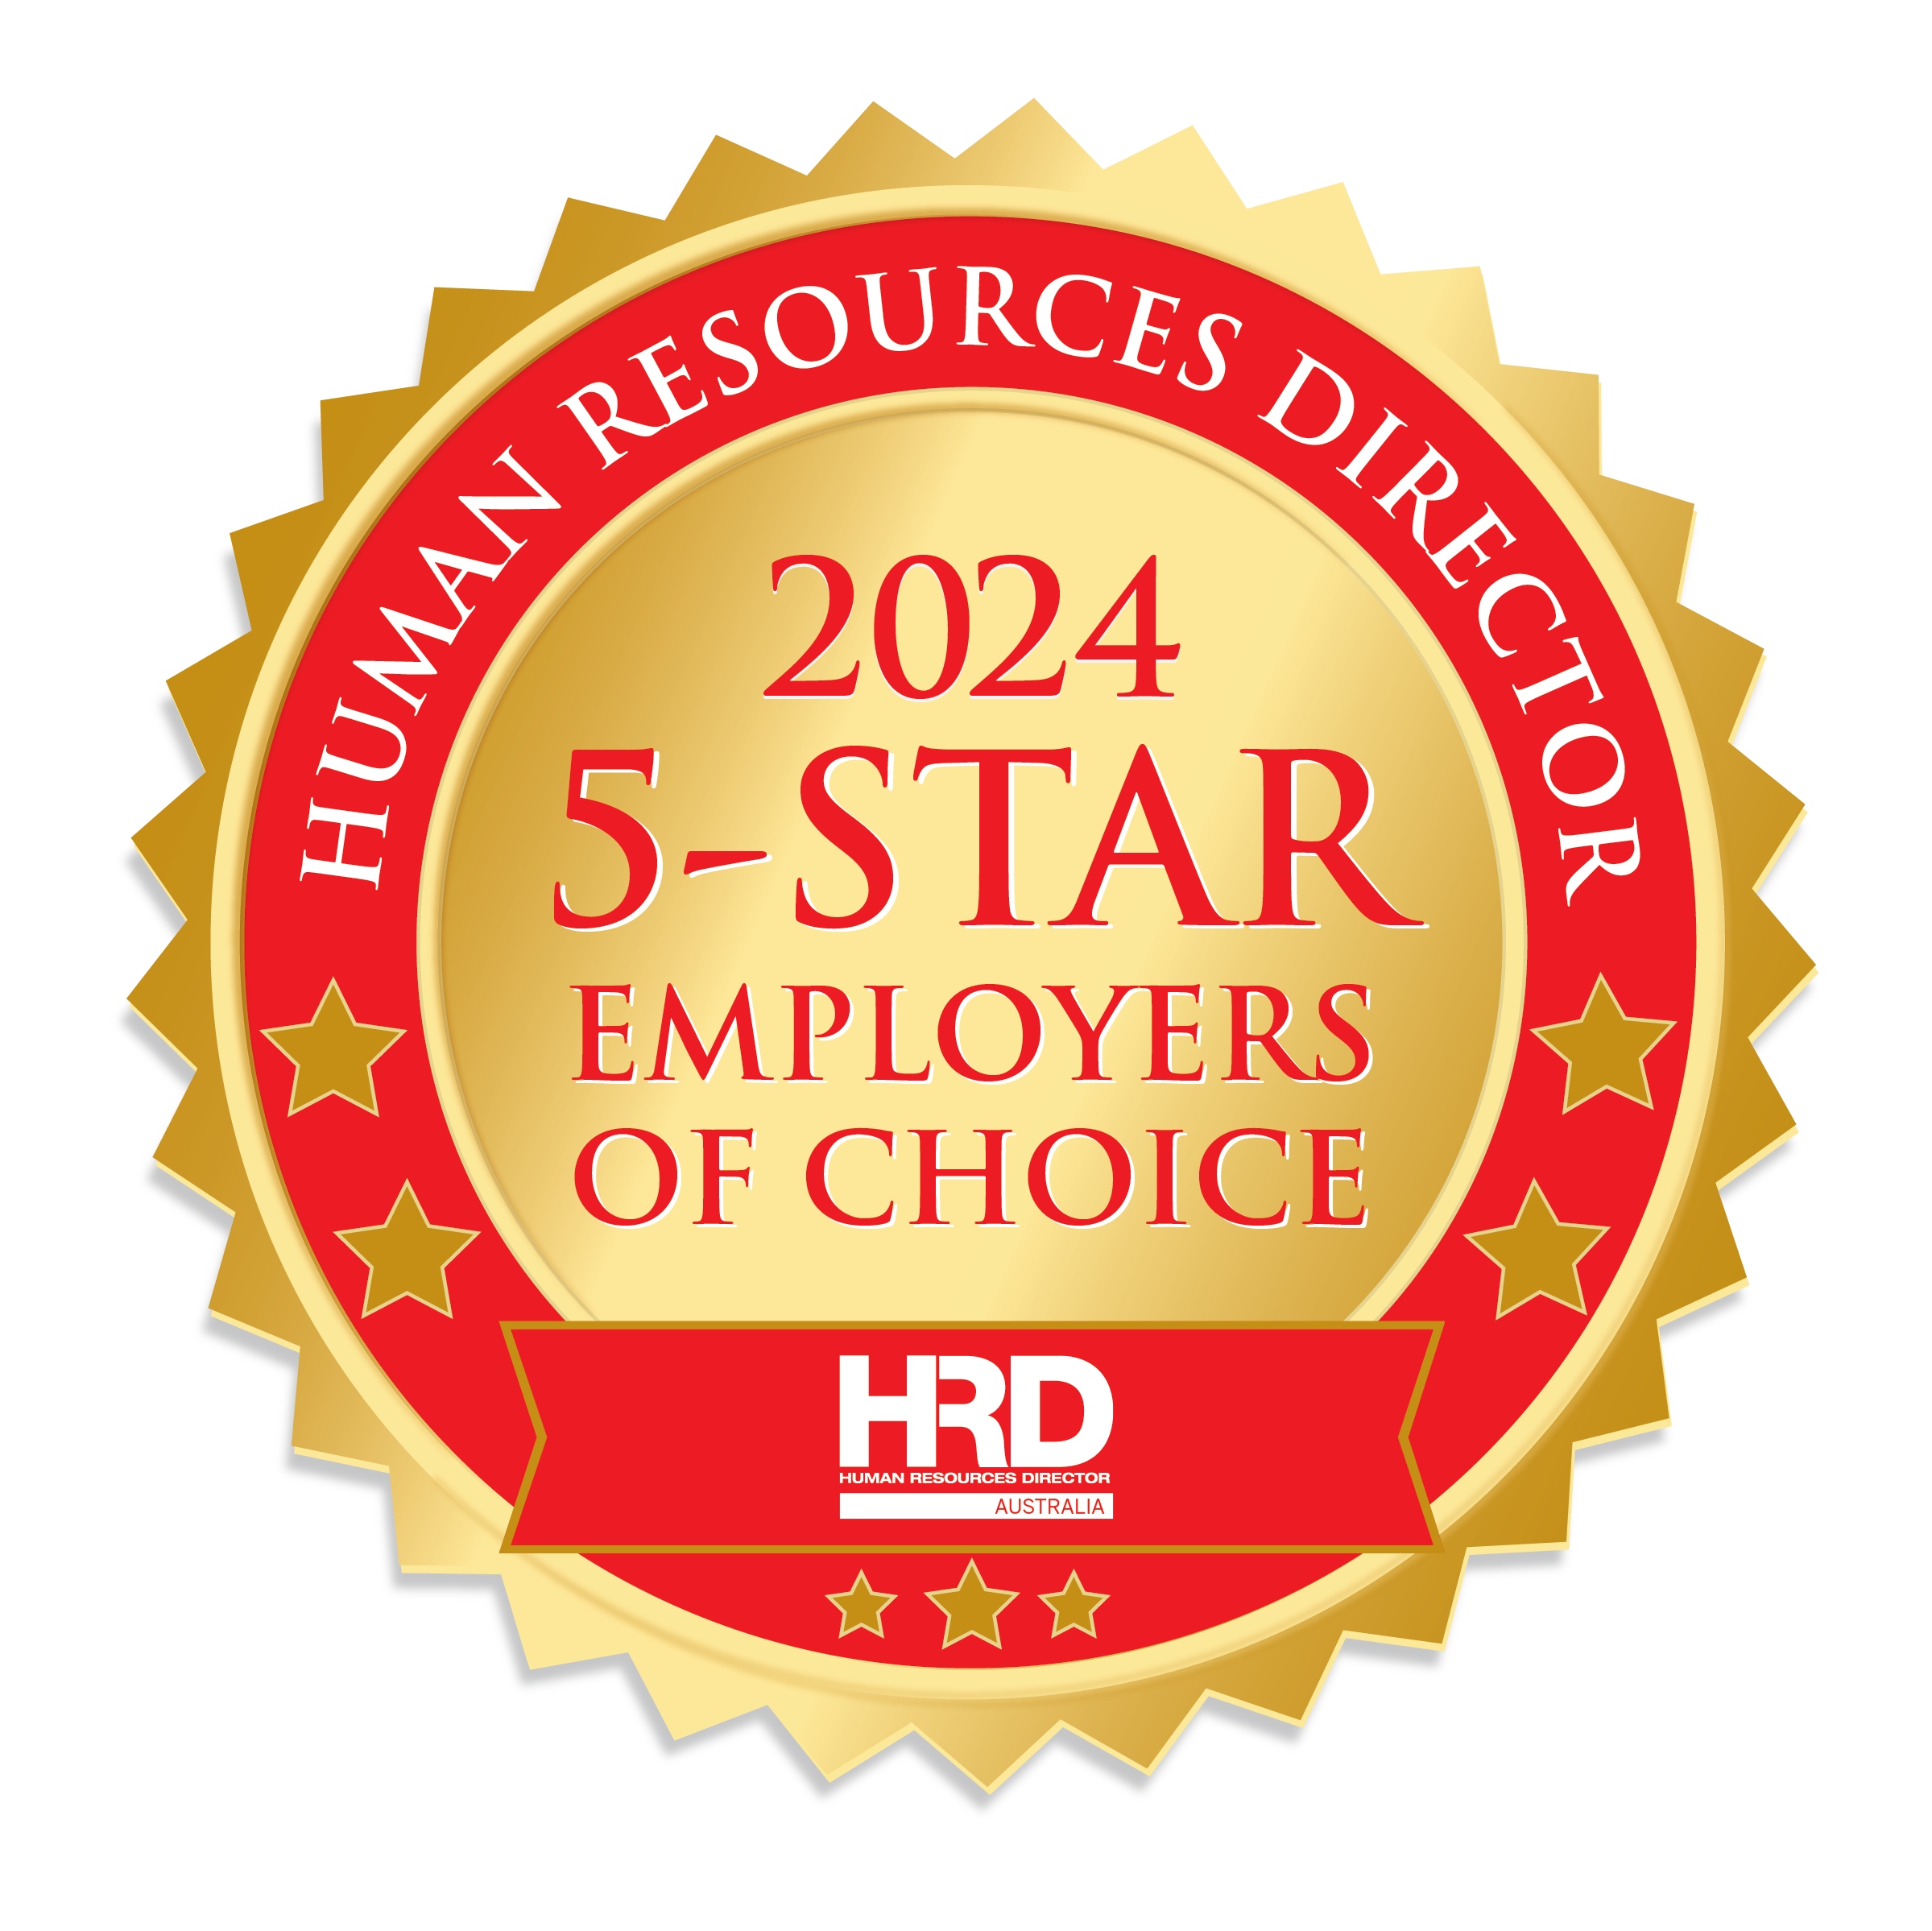 Best Companies to Work for in Australia | 5-Star Employers